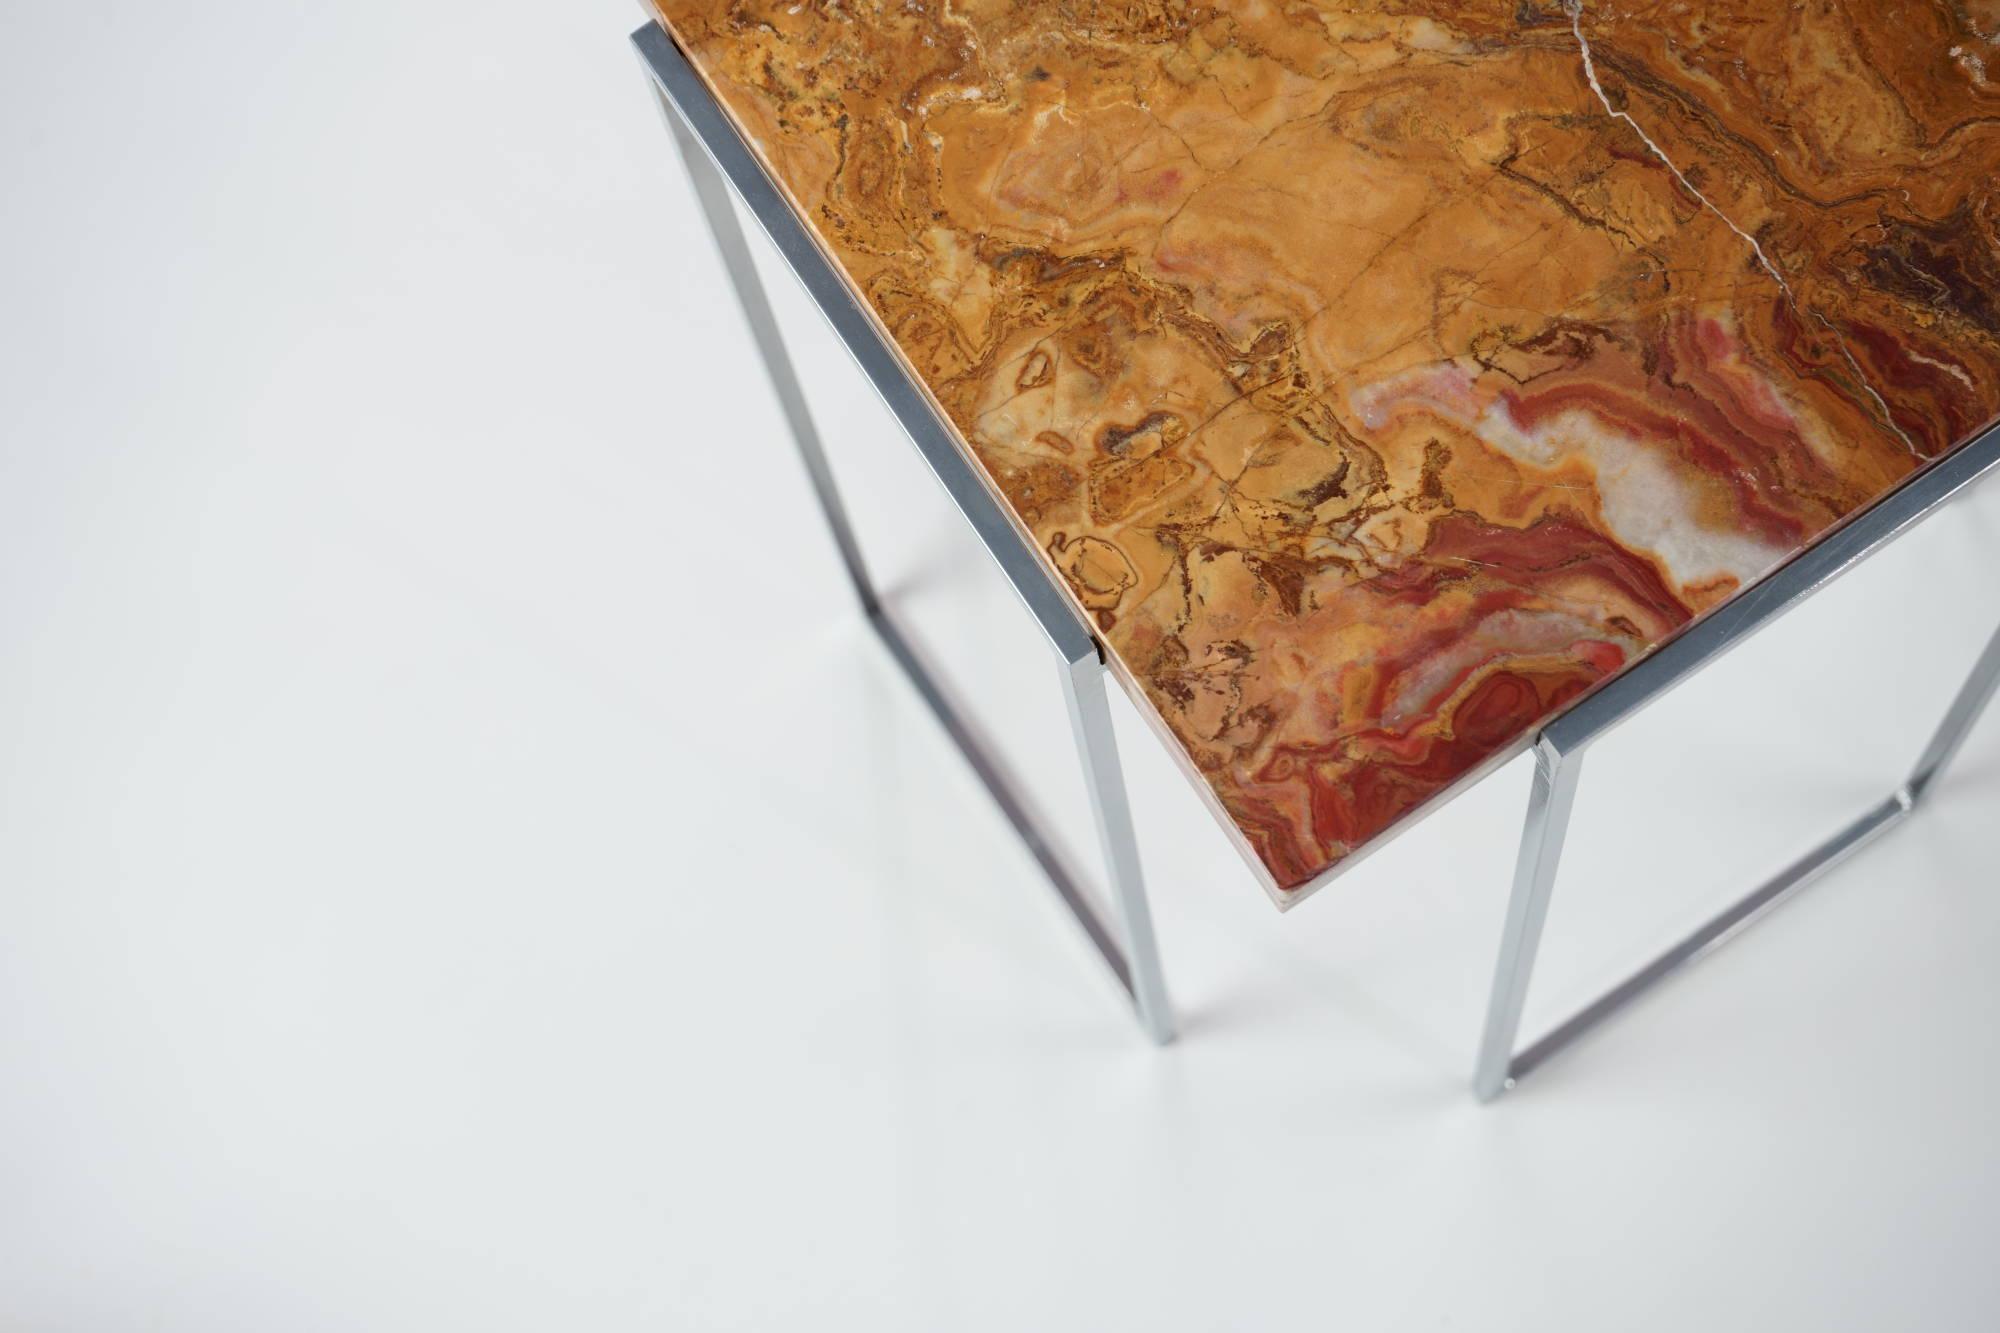 Kaus Cromo, Persian Onyx Side Table By DFdesignlab Handmade in Italy In New Condition For Sale In Campobasso, CB